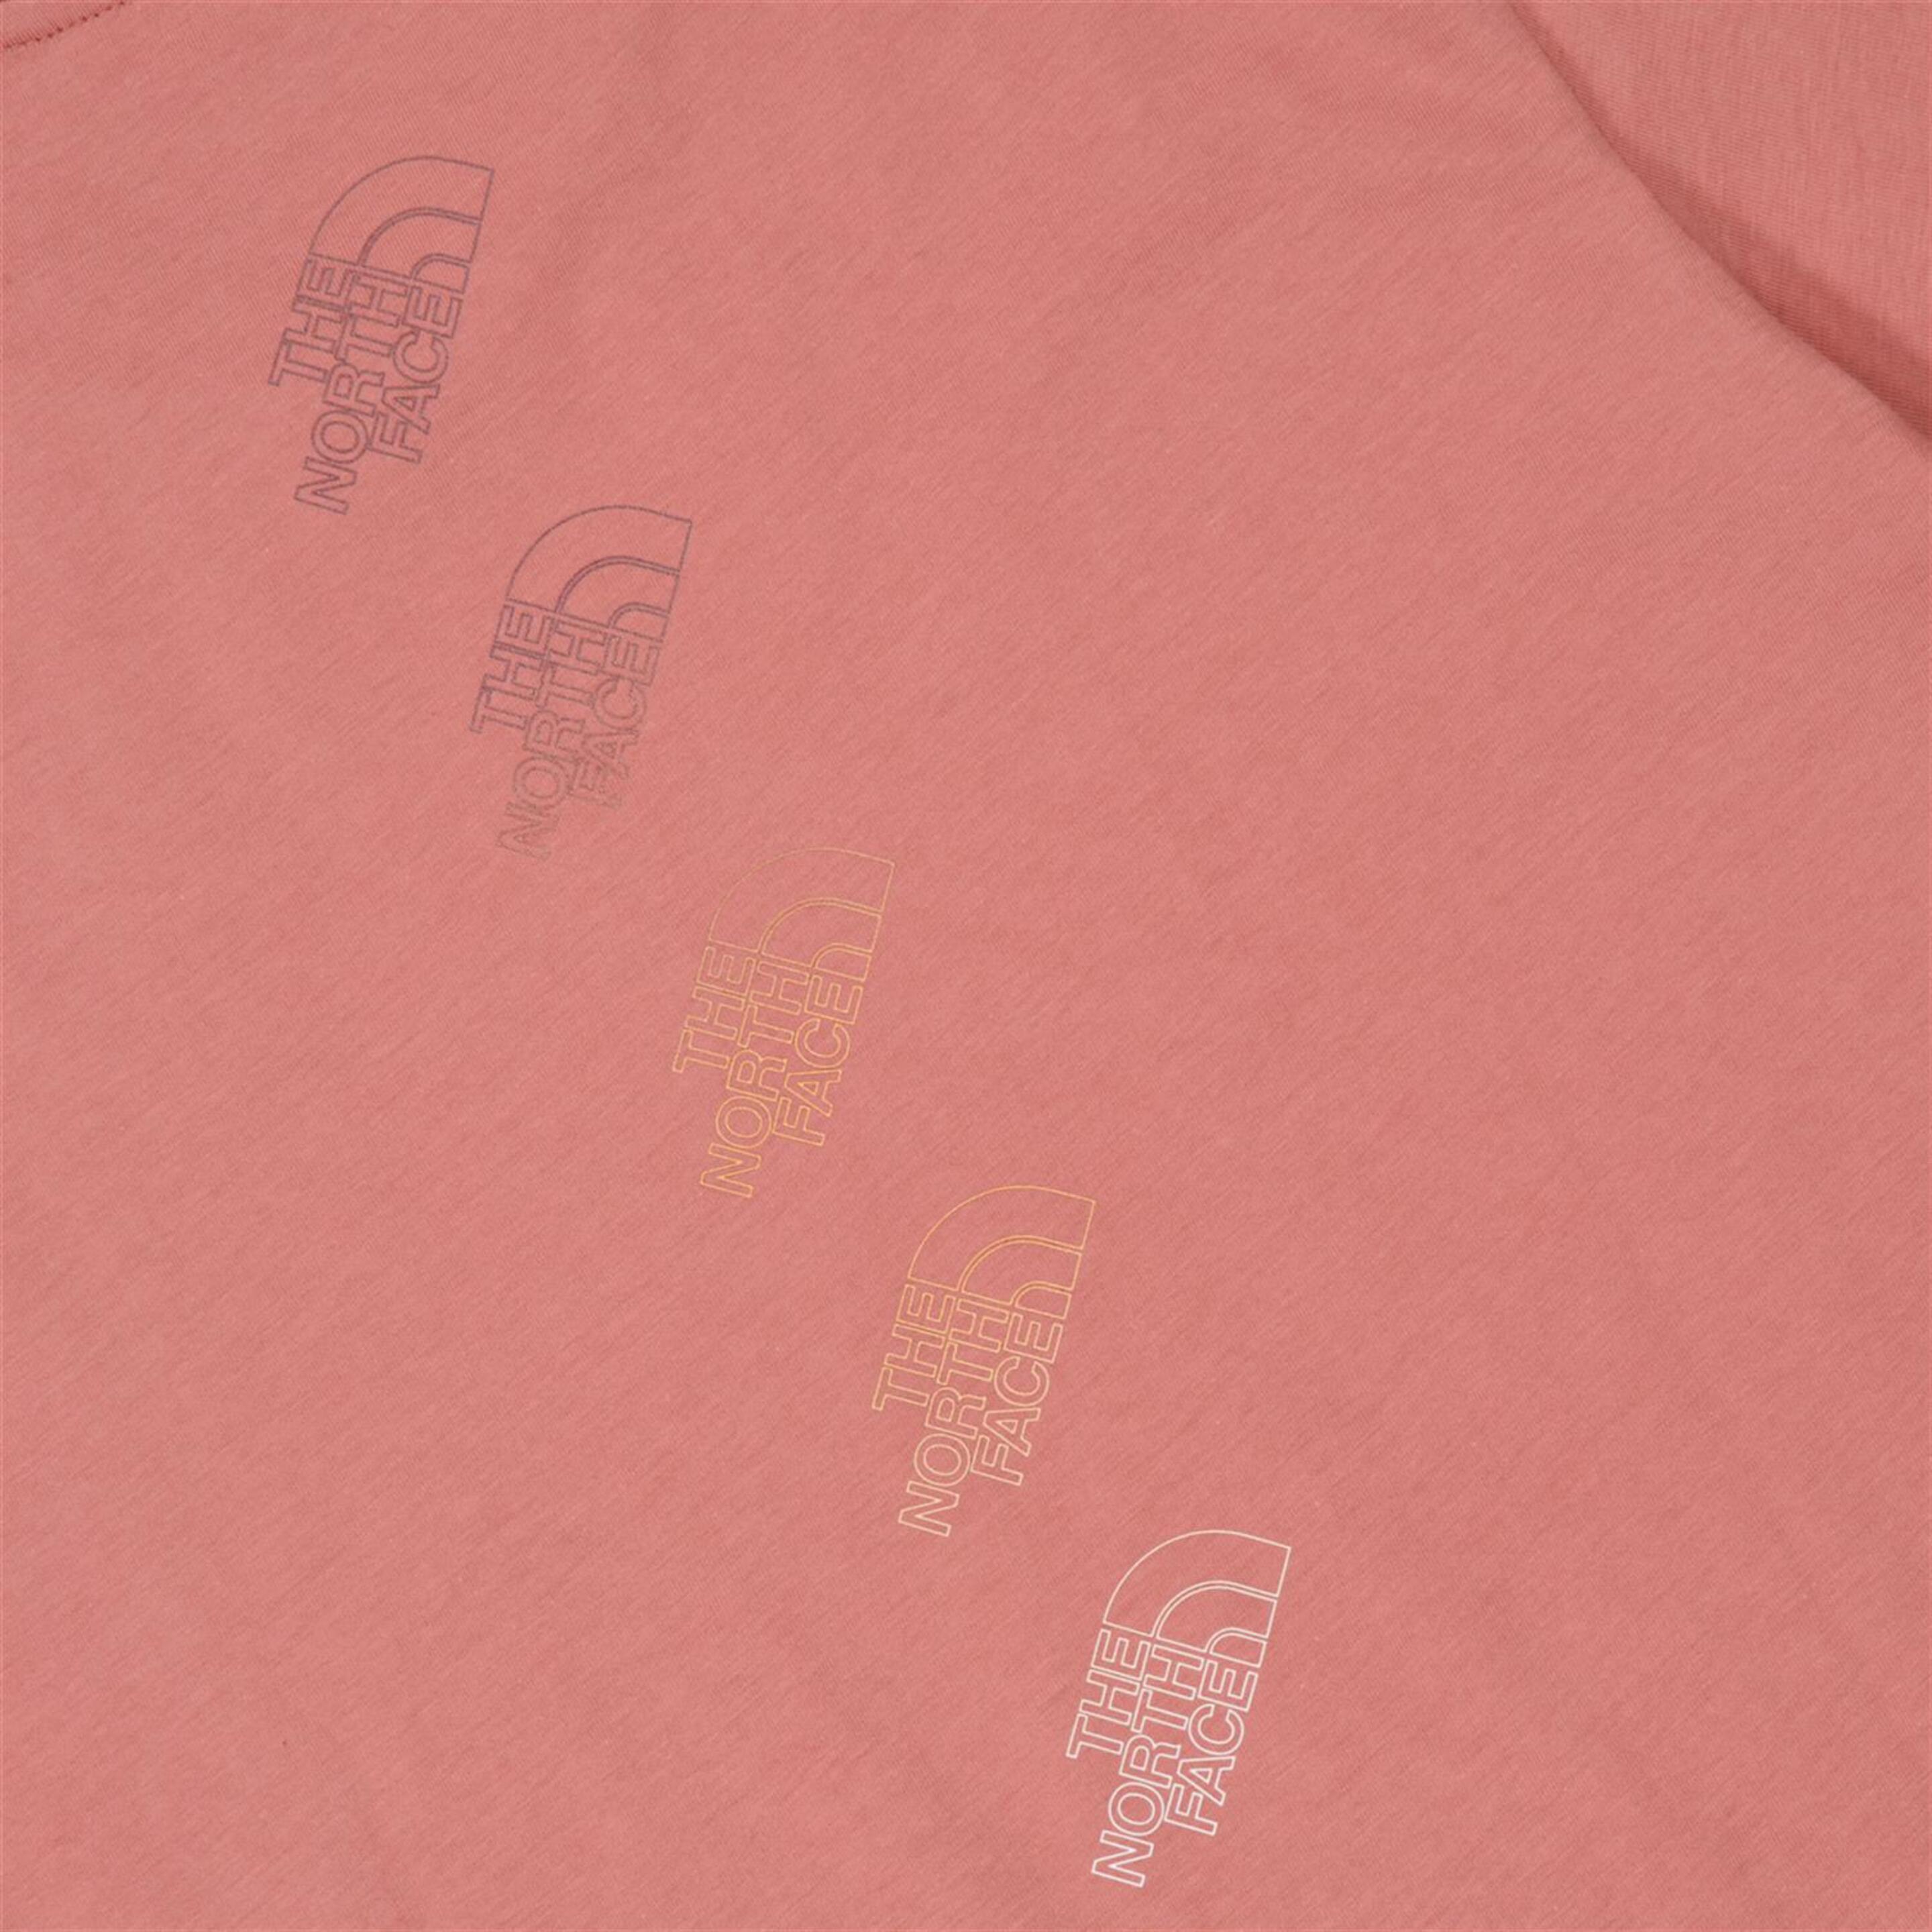 The North Face Relaxed Graphic 2